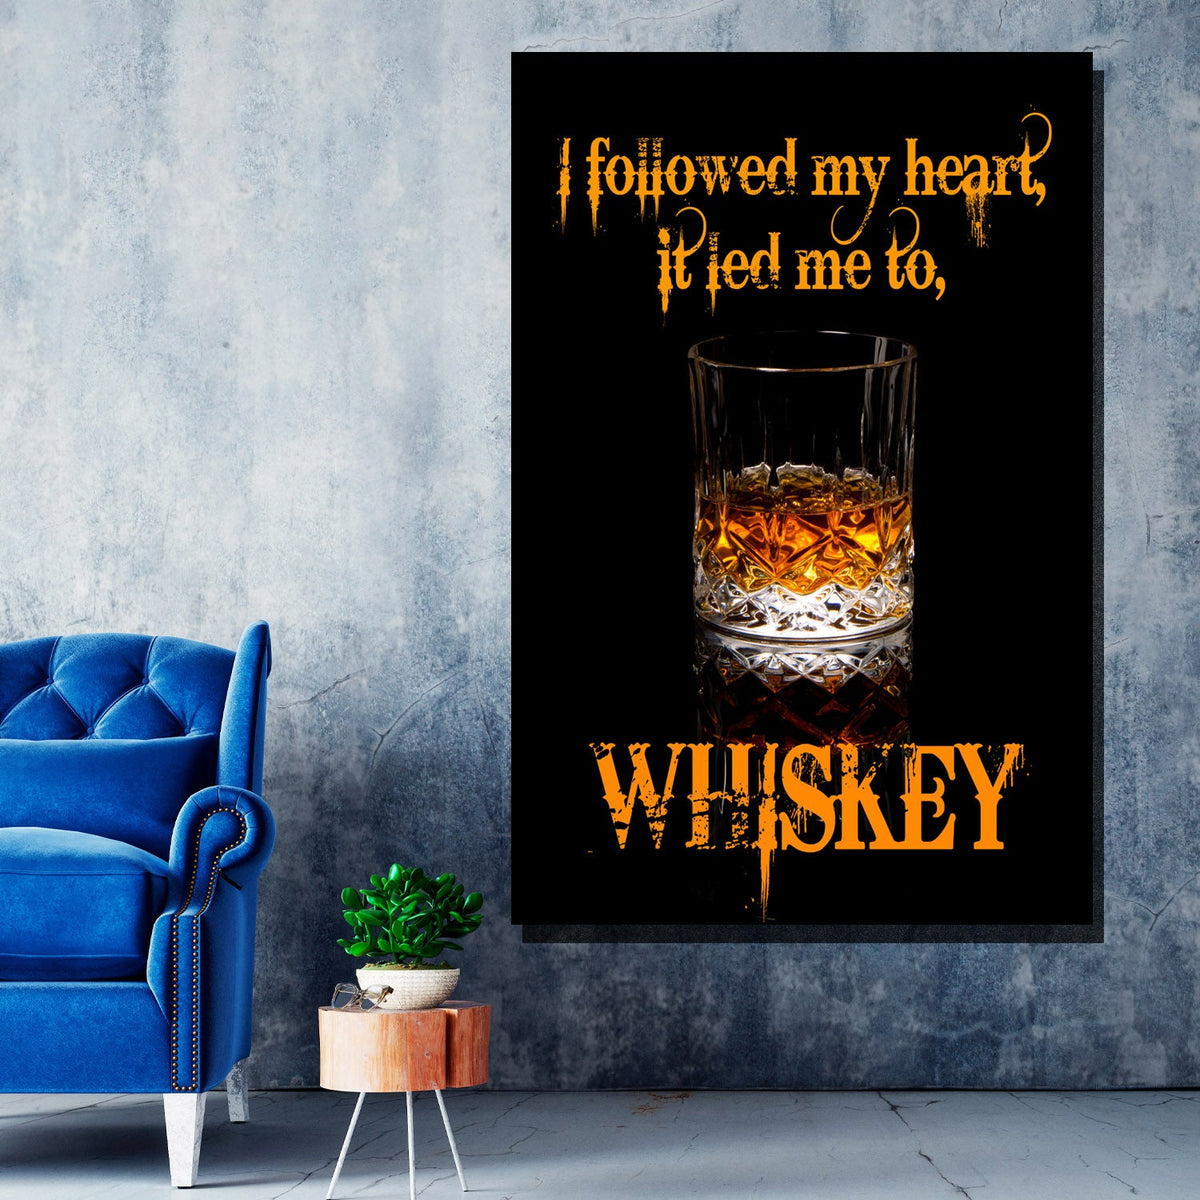 https://cdn.shopify.com/s/files/1/0387/9986/8044/products/WhiskeyQuoteCanvasArtprintStretched-3.jpg